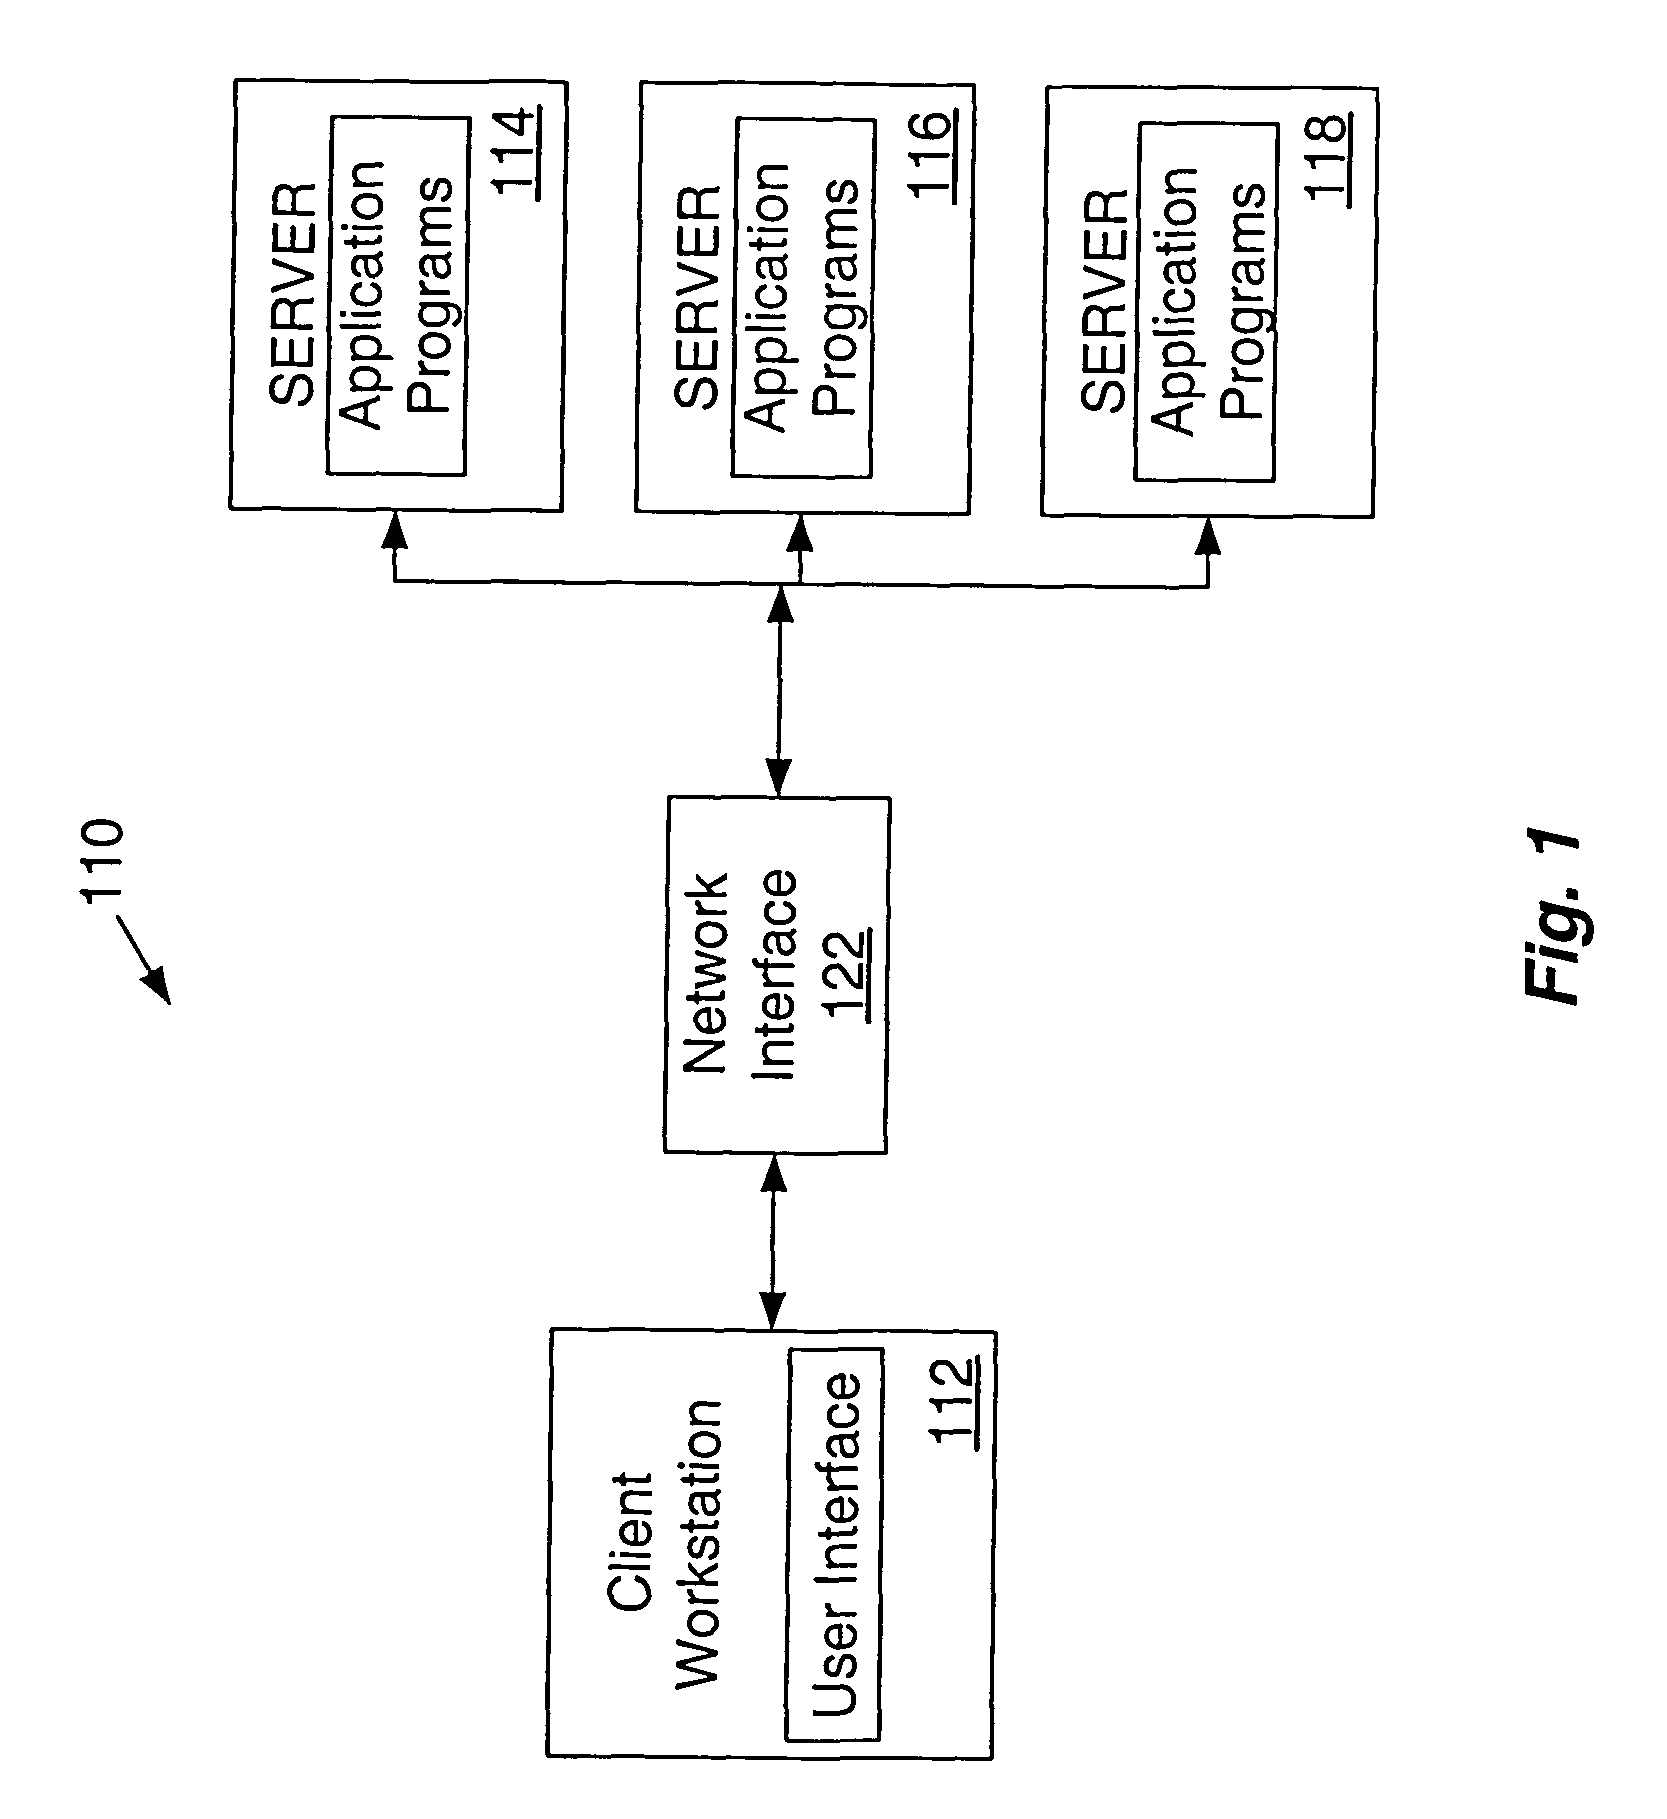 System and method for remotely debugging application programs